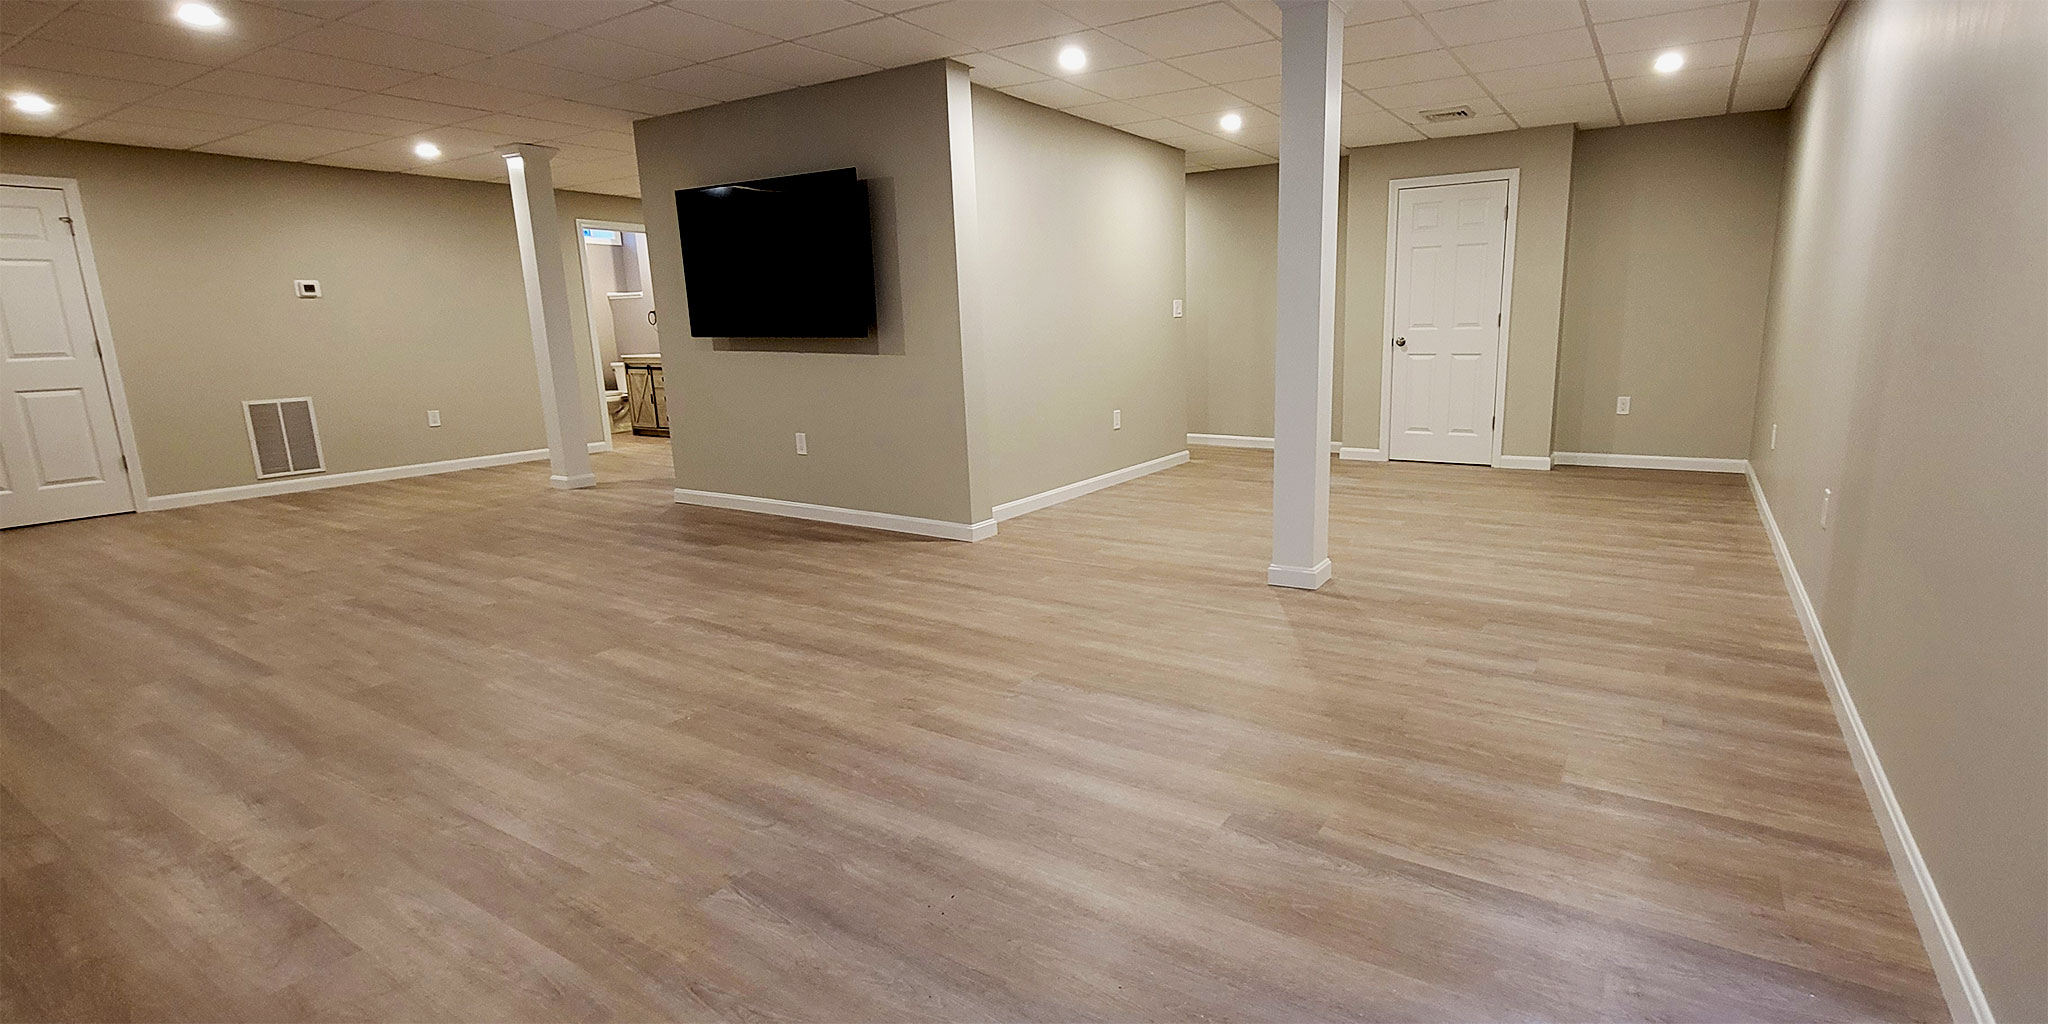 Finished basement in Franklin, MA